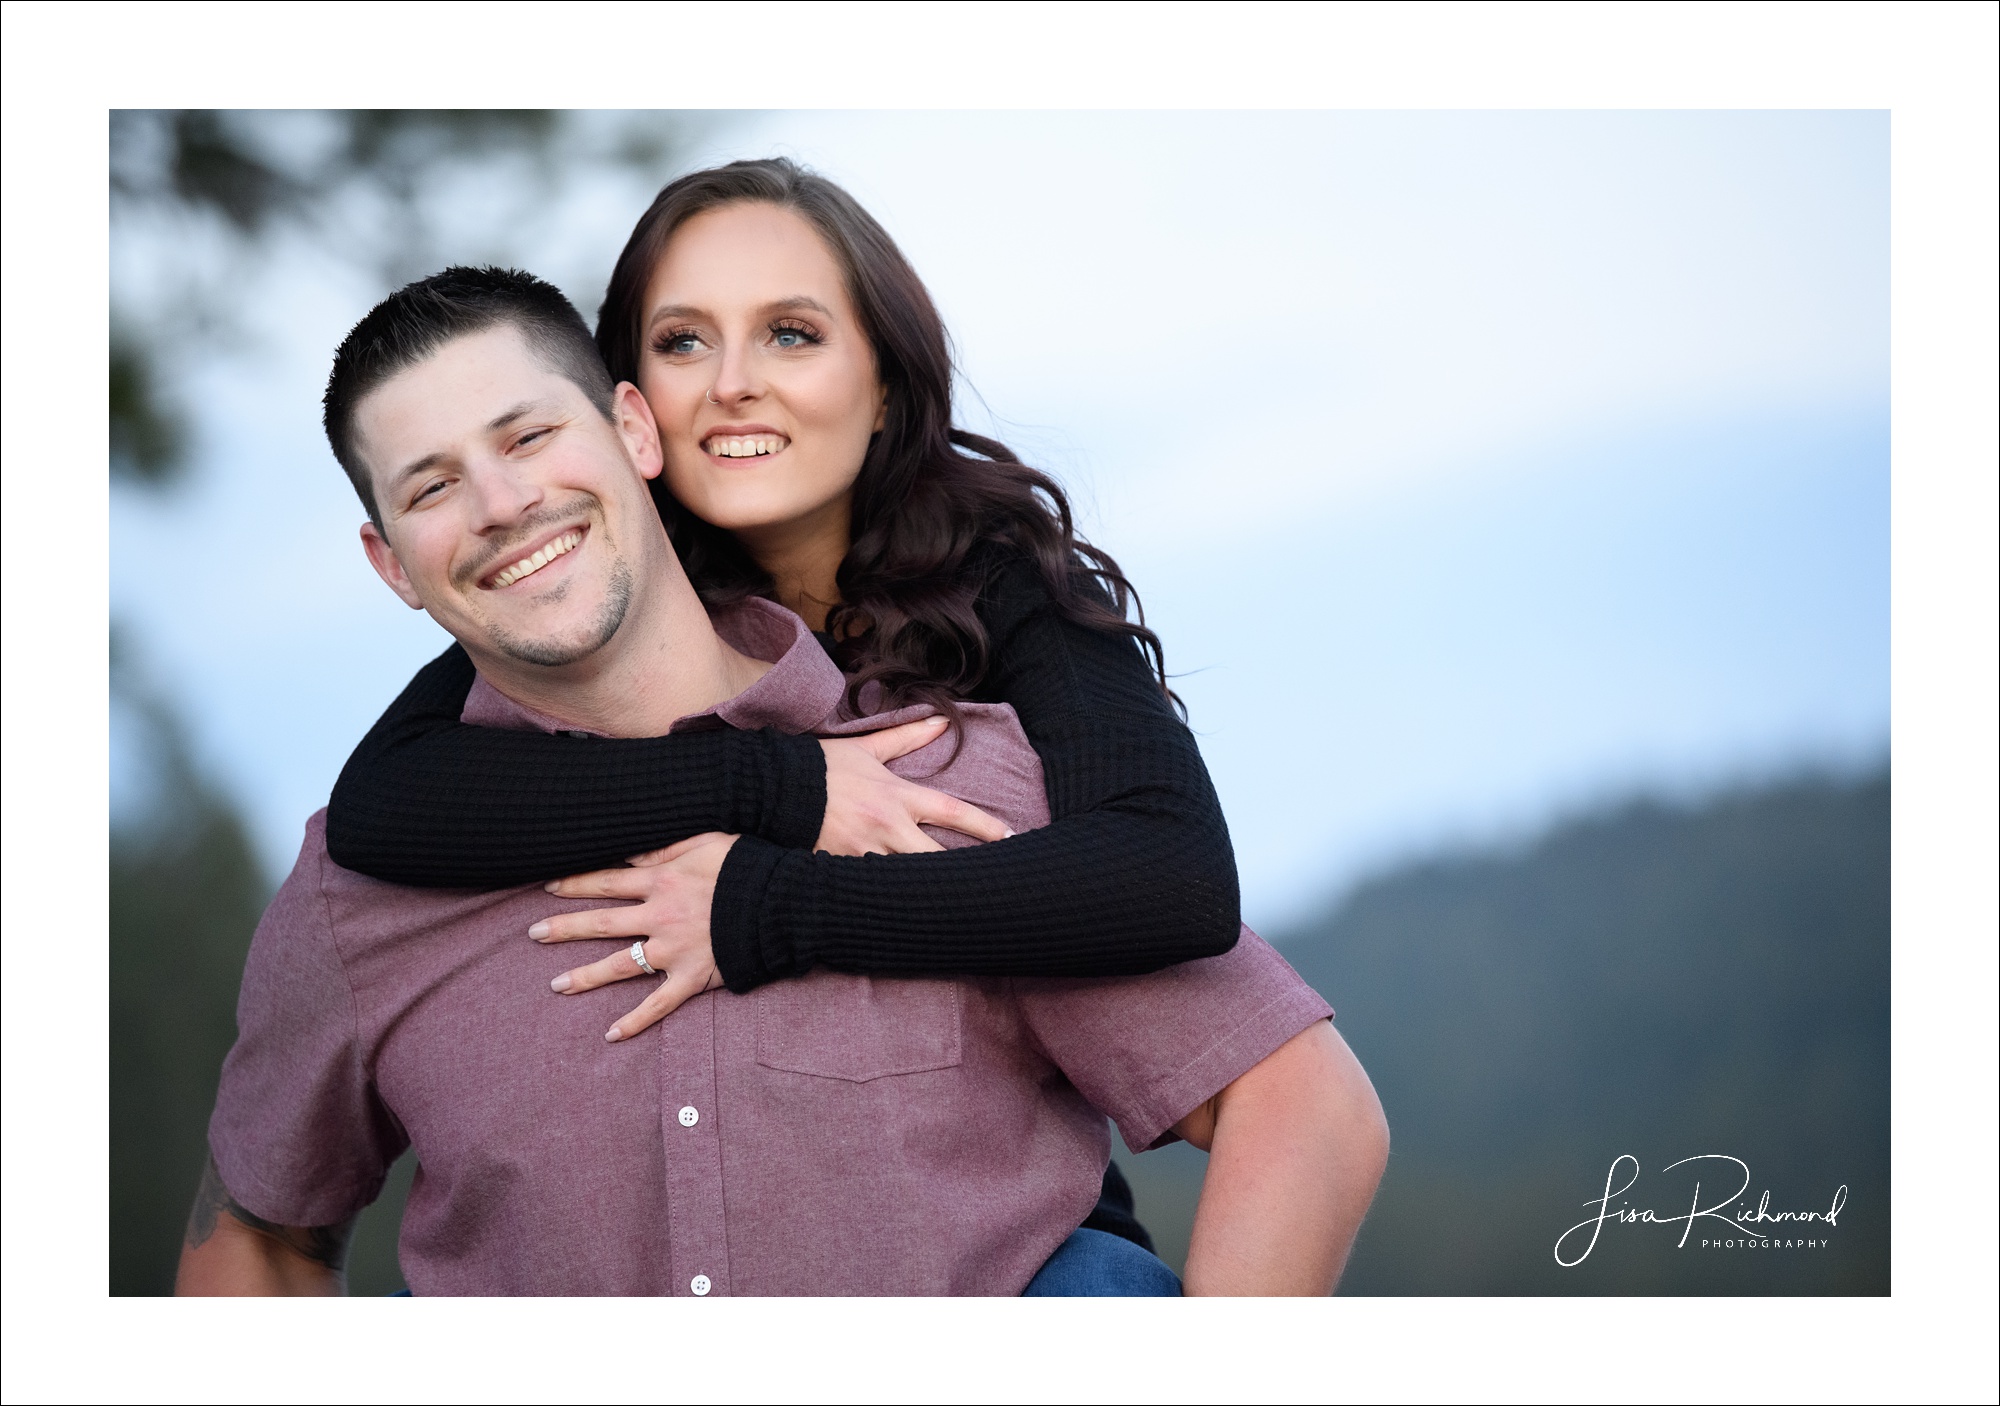 Stephanie and Ryan are getting married at Davies Family Inn this fall